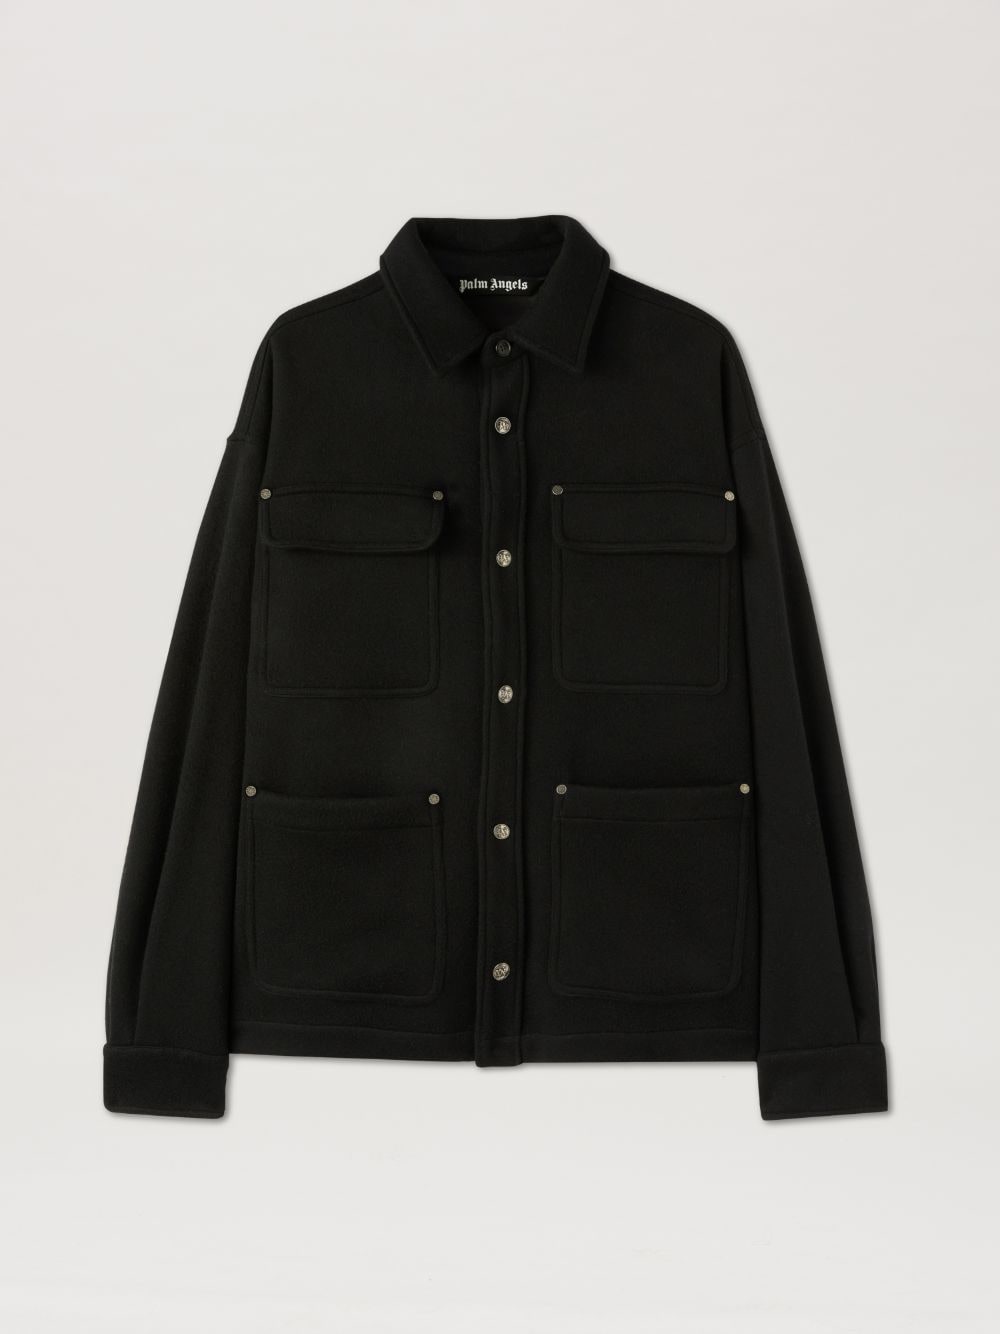 Palm Angels Multipockets Overshirt In Black